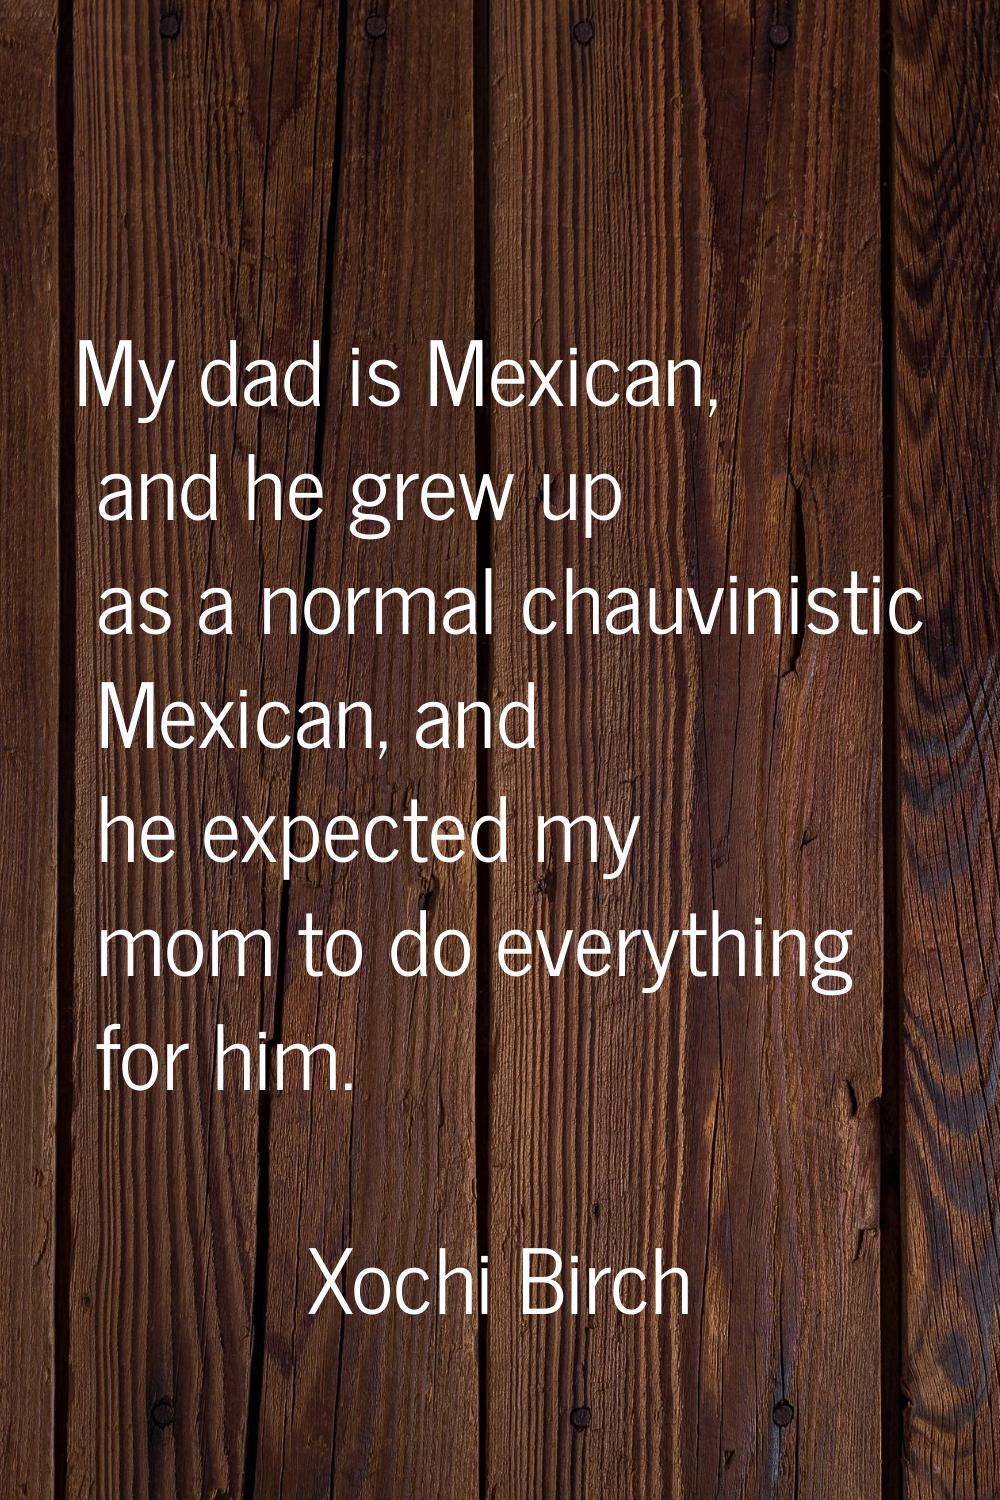 My dad is Mexican, and he grew up as a normal chauvinistic Mexican, and he expected my mom to do ev